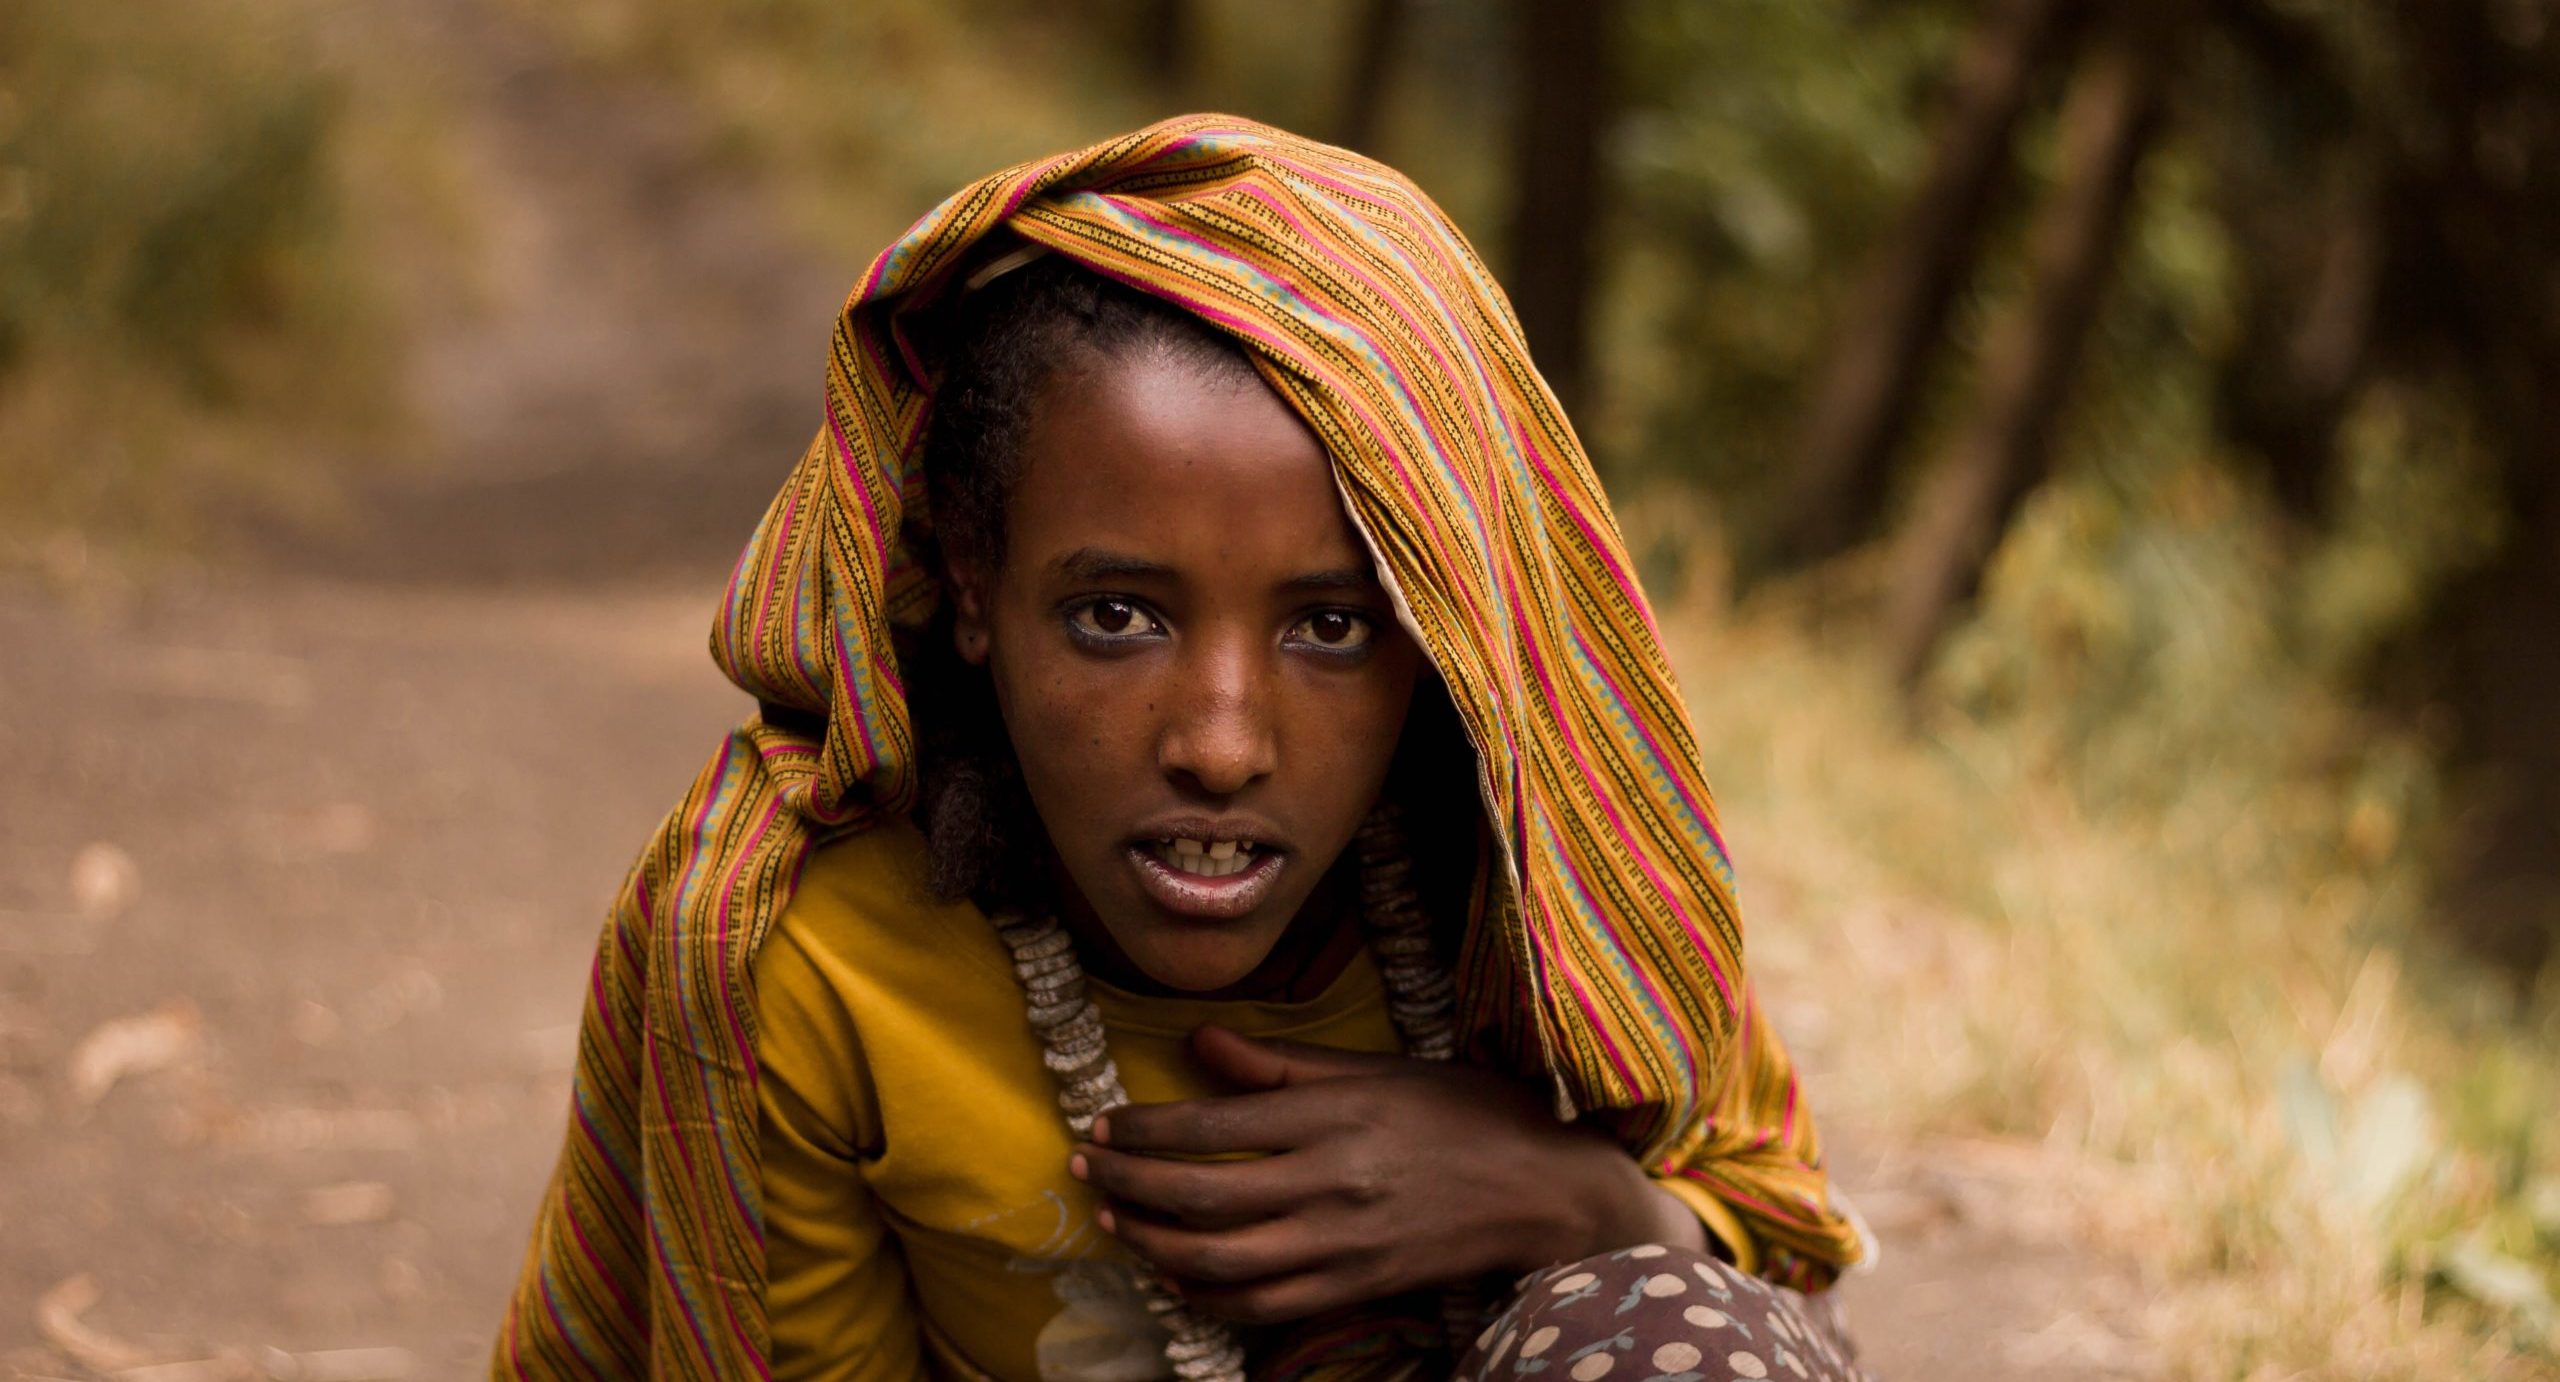 The Costs of Limited Humanitarian Access for Women in Tigray